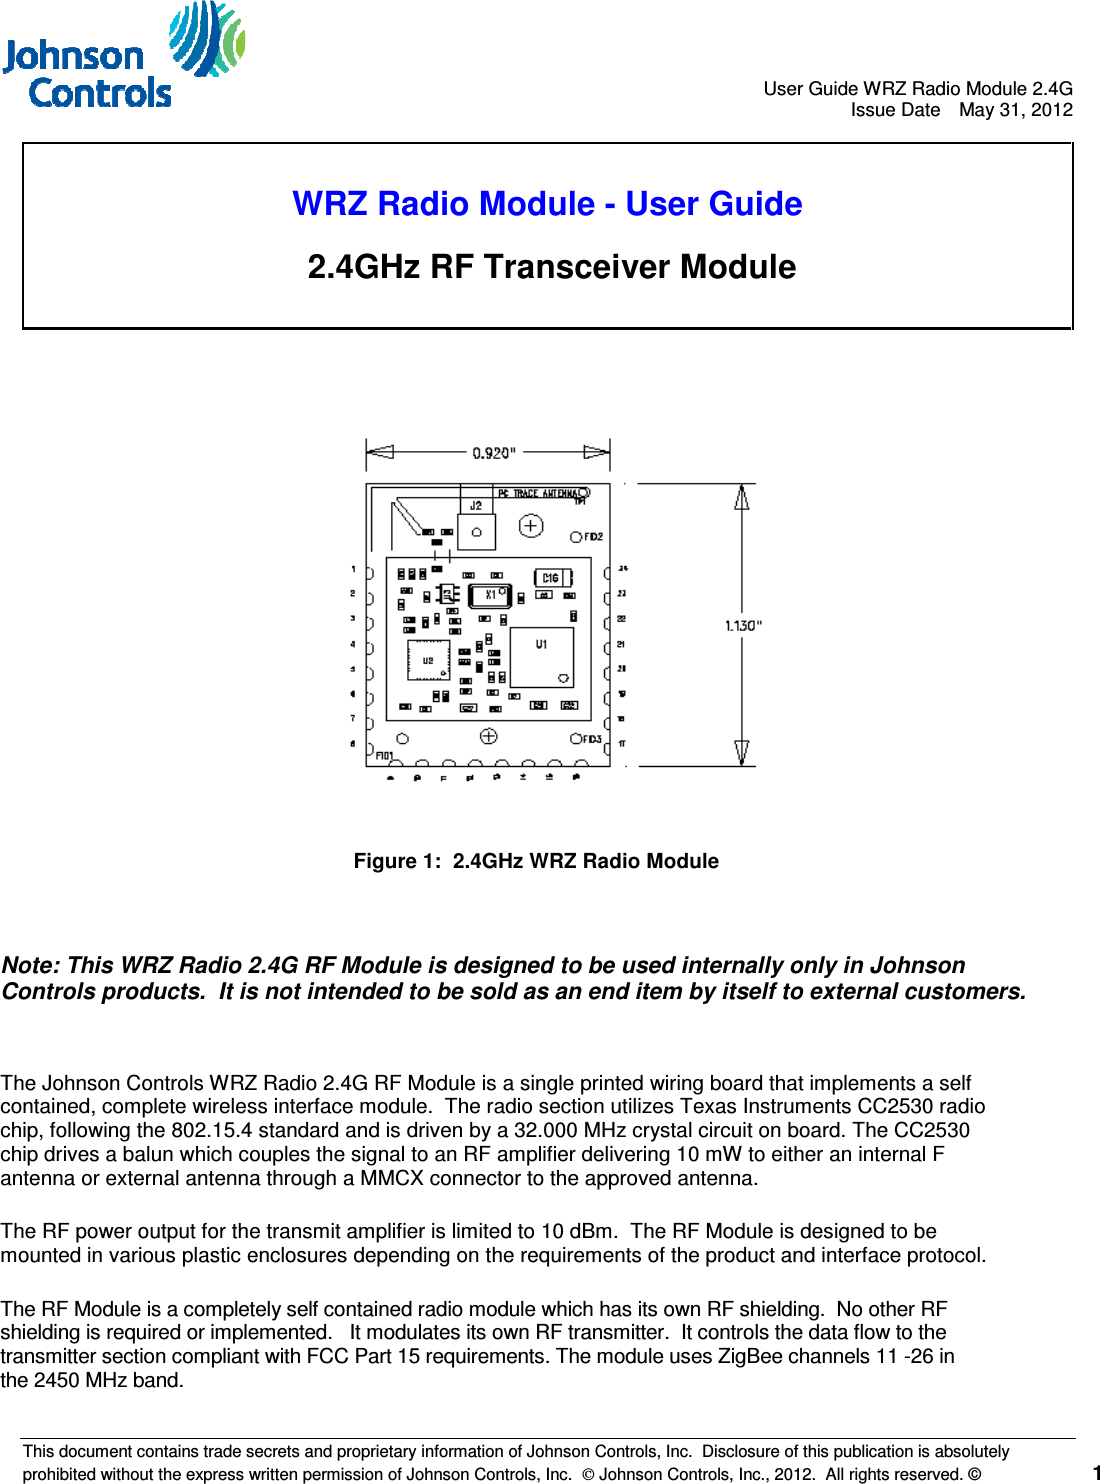                                       User Guide WRZ Radio Module 2.4G   Issue Date  May 31, 2012  This document contains trade secrets and proprietary information of Johnson Controls, Inc.  Disclosure of this publication is absolutely prohibited without the express written permission of Johnson Controls, Inc.   Johnson Controls, Inc., 2012.  All rights reserved. ©   1        WRZ Radio Module - User Guide  2.4GHz RF Transceiver Module   Figure 1:  2.4GHz WRZ Radio Module   Note: This WRZ Radio 2.4G RF Module is designed to be used internally only in Johnson Controls products.  It is not intended to be sold as an end item by itself to external customers.  The Johnson Controls WRZ Radio 2.4G RF Module is a single printed wiring board that implements a self contained, complete wireless interface module.  The radio section utilizes Texas Instruments CC2530 radio chip, following the 802.15.4 standard and is driven by a 32.000 MHz crystal circuit on board. The CC2530 chip drives a balun which couples the signal to an RF amplifier delivering 10 mW to either an internal F antenna or external antenna through a MMCX connector to the approved antenna.  The RF power output for the transmit amplifier is limited to 10 dBm.  The RF Module is designed to be mounted in various plastic enclosures depending on the requirements of the product and interface protocol.   The RF Module is a completely self contained radio module which has its own RF shielding.  No other RF shielding is required or implemented.   It modulates its own RF transmitter.  It controls the data flow to the transmitter section compliant with FCC Part 15 requirements. The module uses ZigBee channels 11 -26 in the 2450 MHz band. 